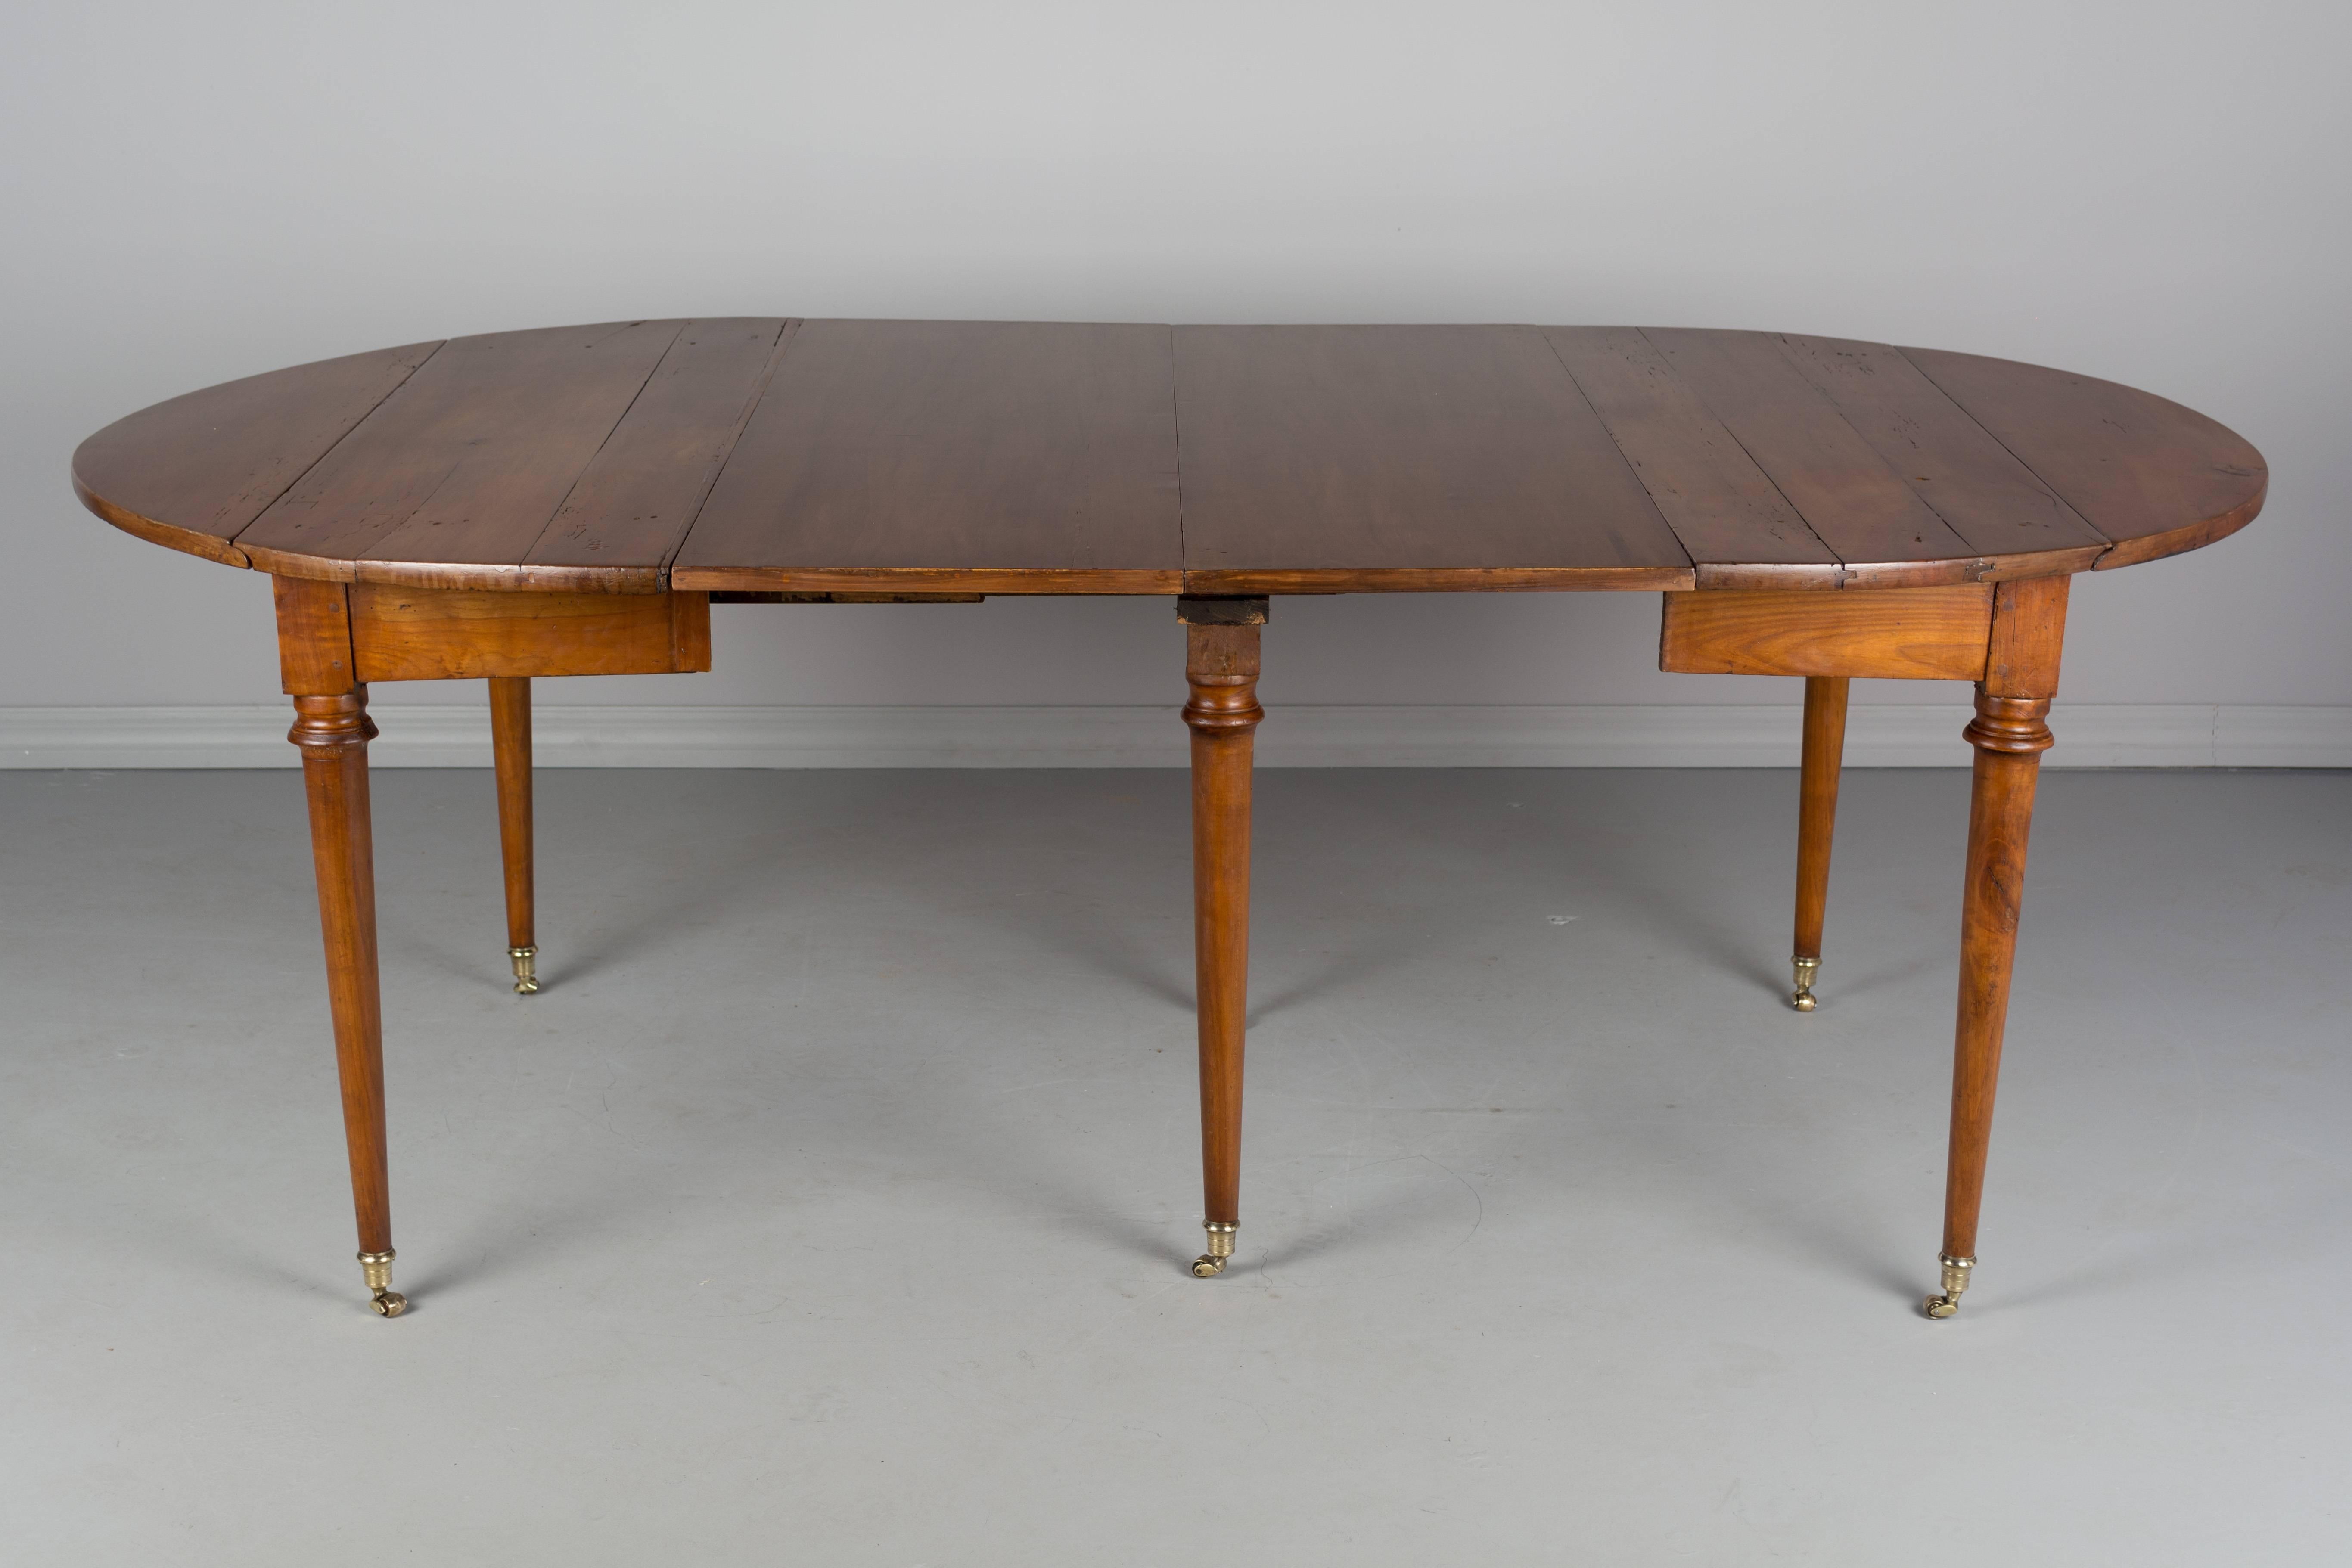 A 19th century French Louis XVI style drop-leaf dining table made of solid cherry. Six simple turned legs ending in polished cast brass wheels. Two 16 inch newer leaves are veneer of cherry, circa 1840-1860. 
Closed: 49